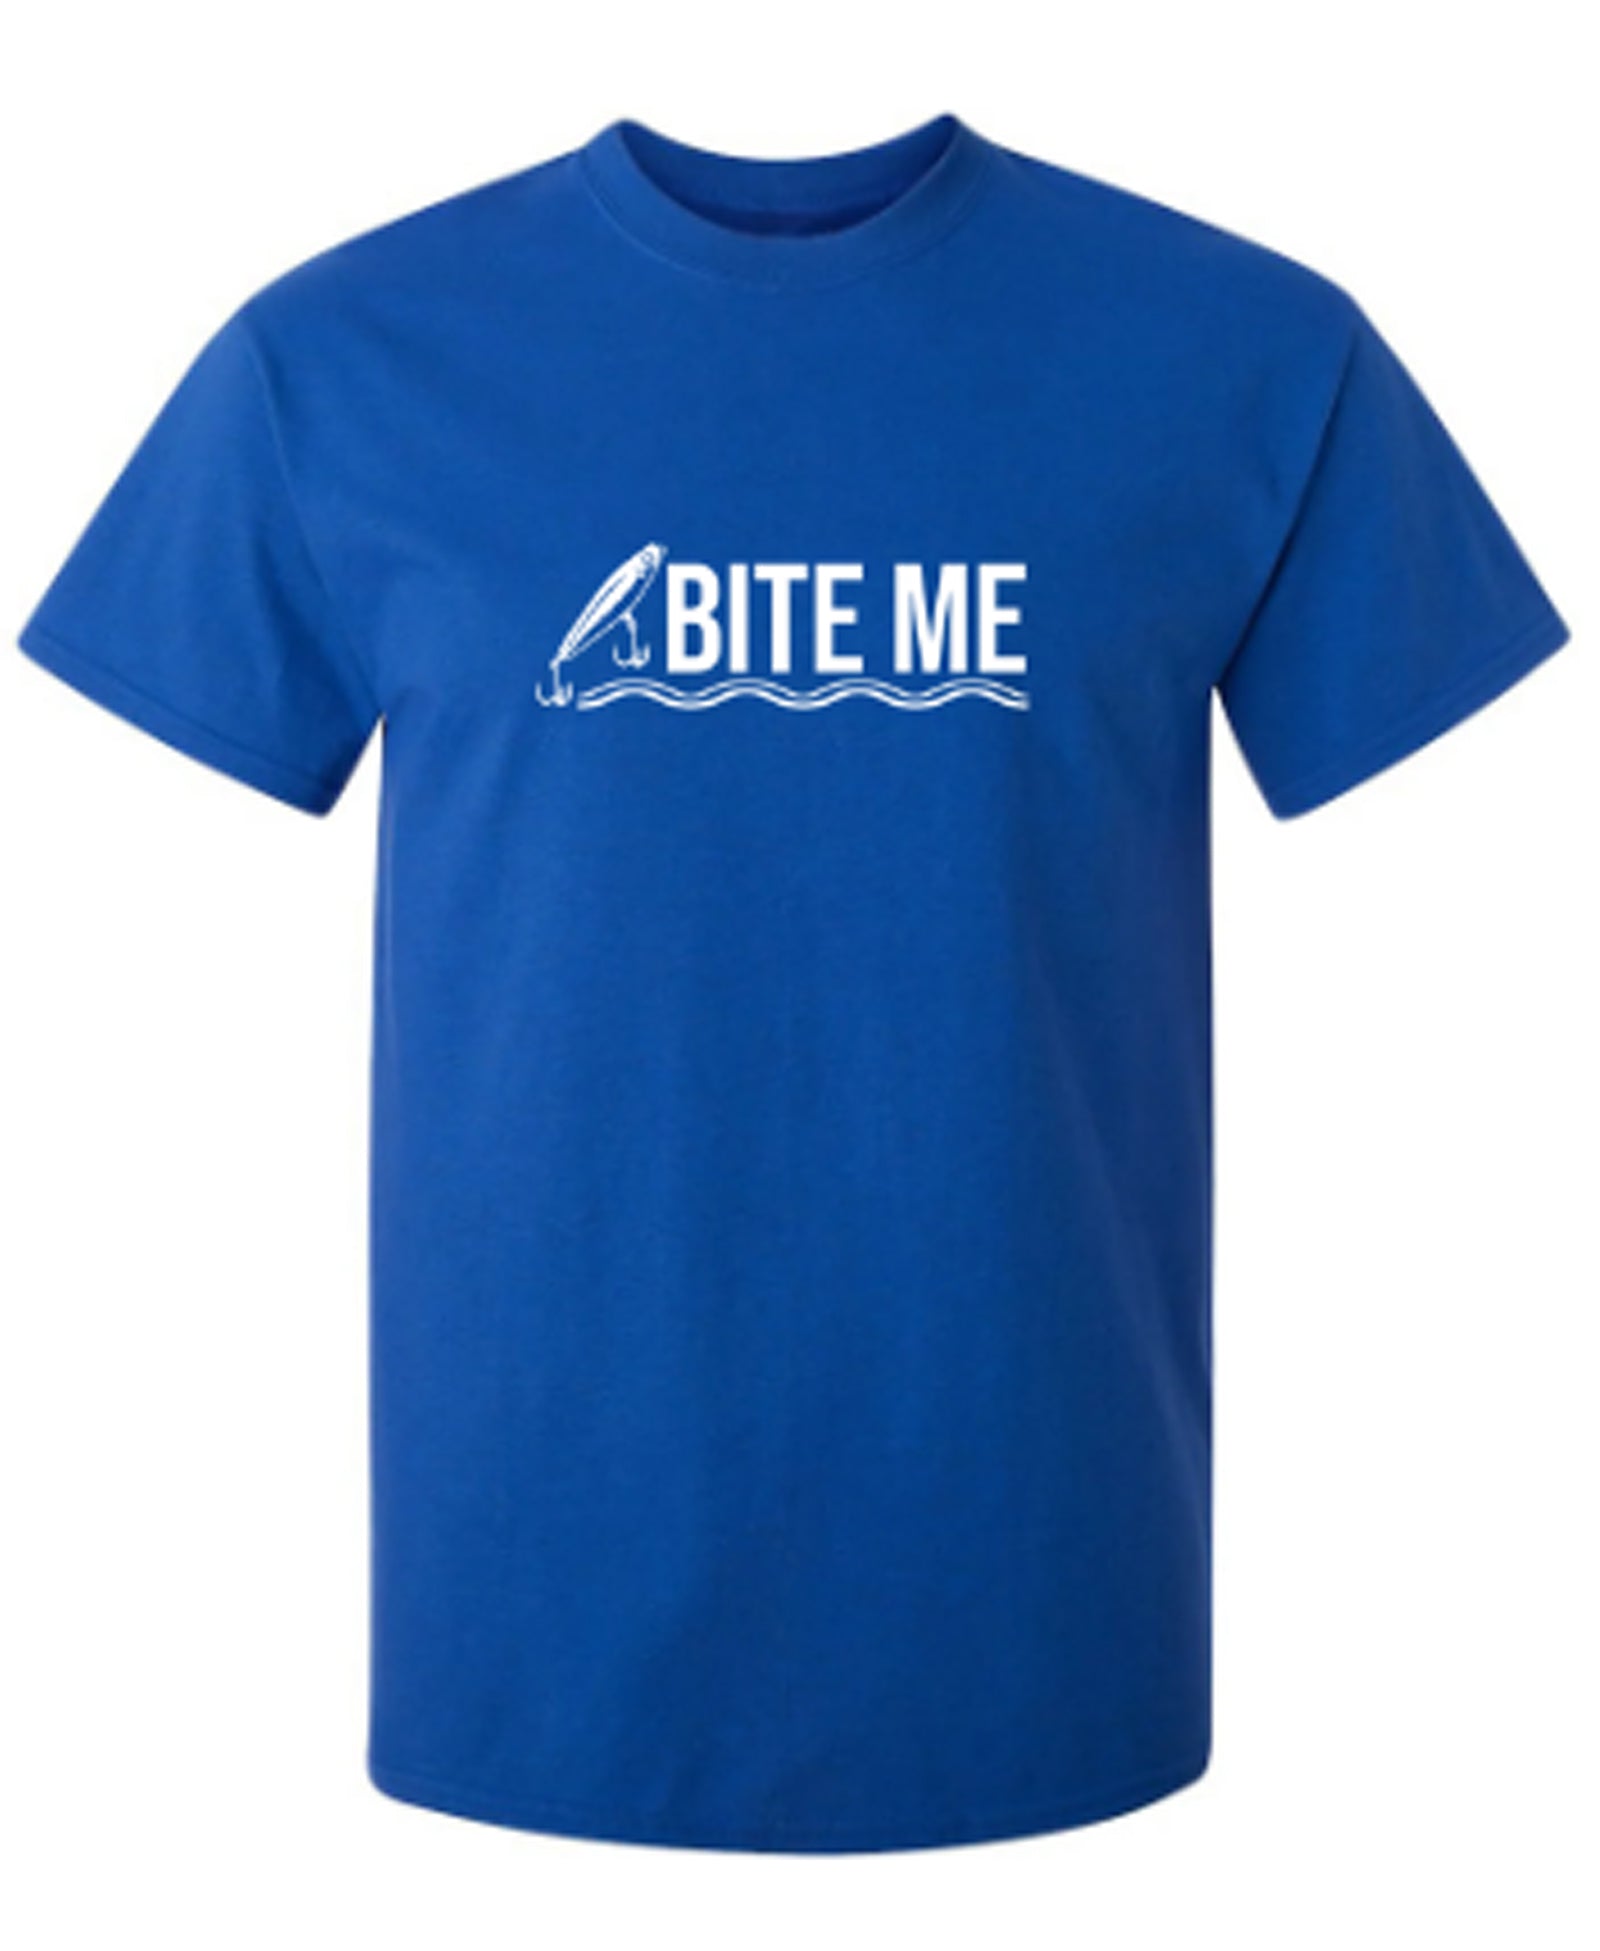 Bite Me - Funny T Shirts & Graphic Tees